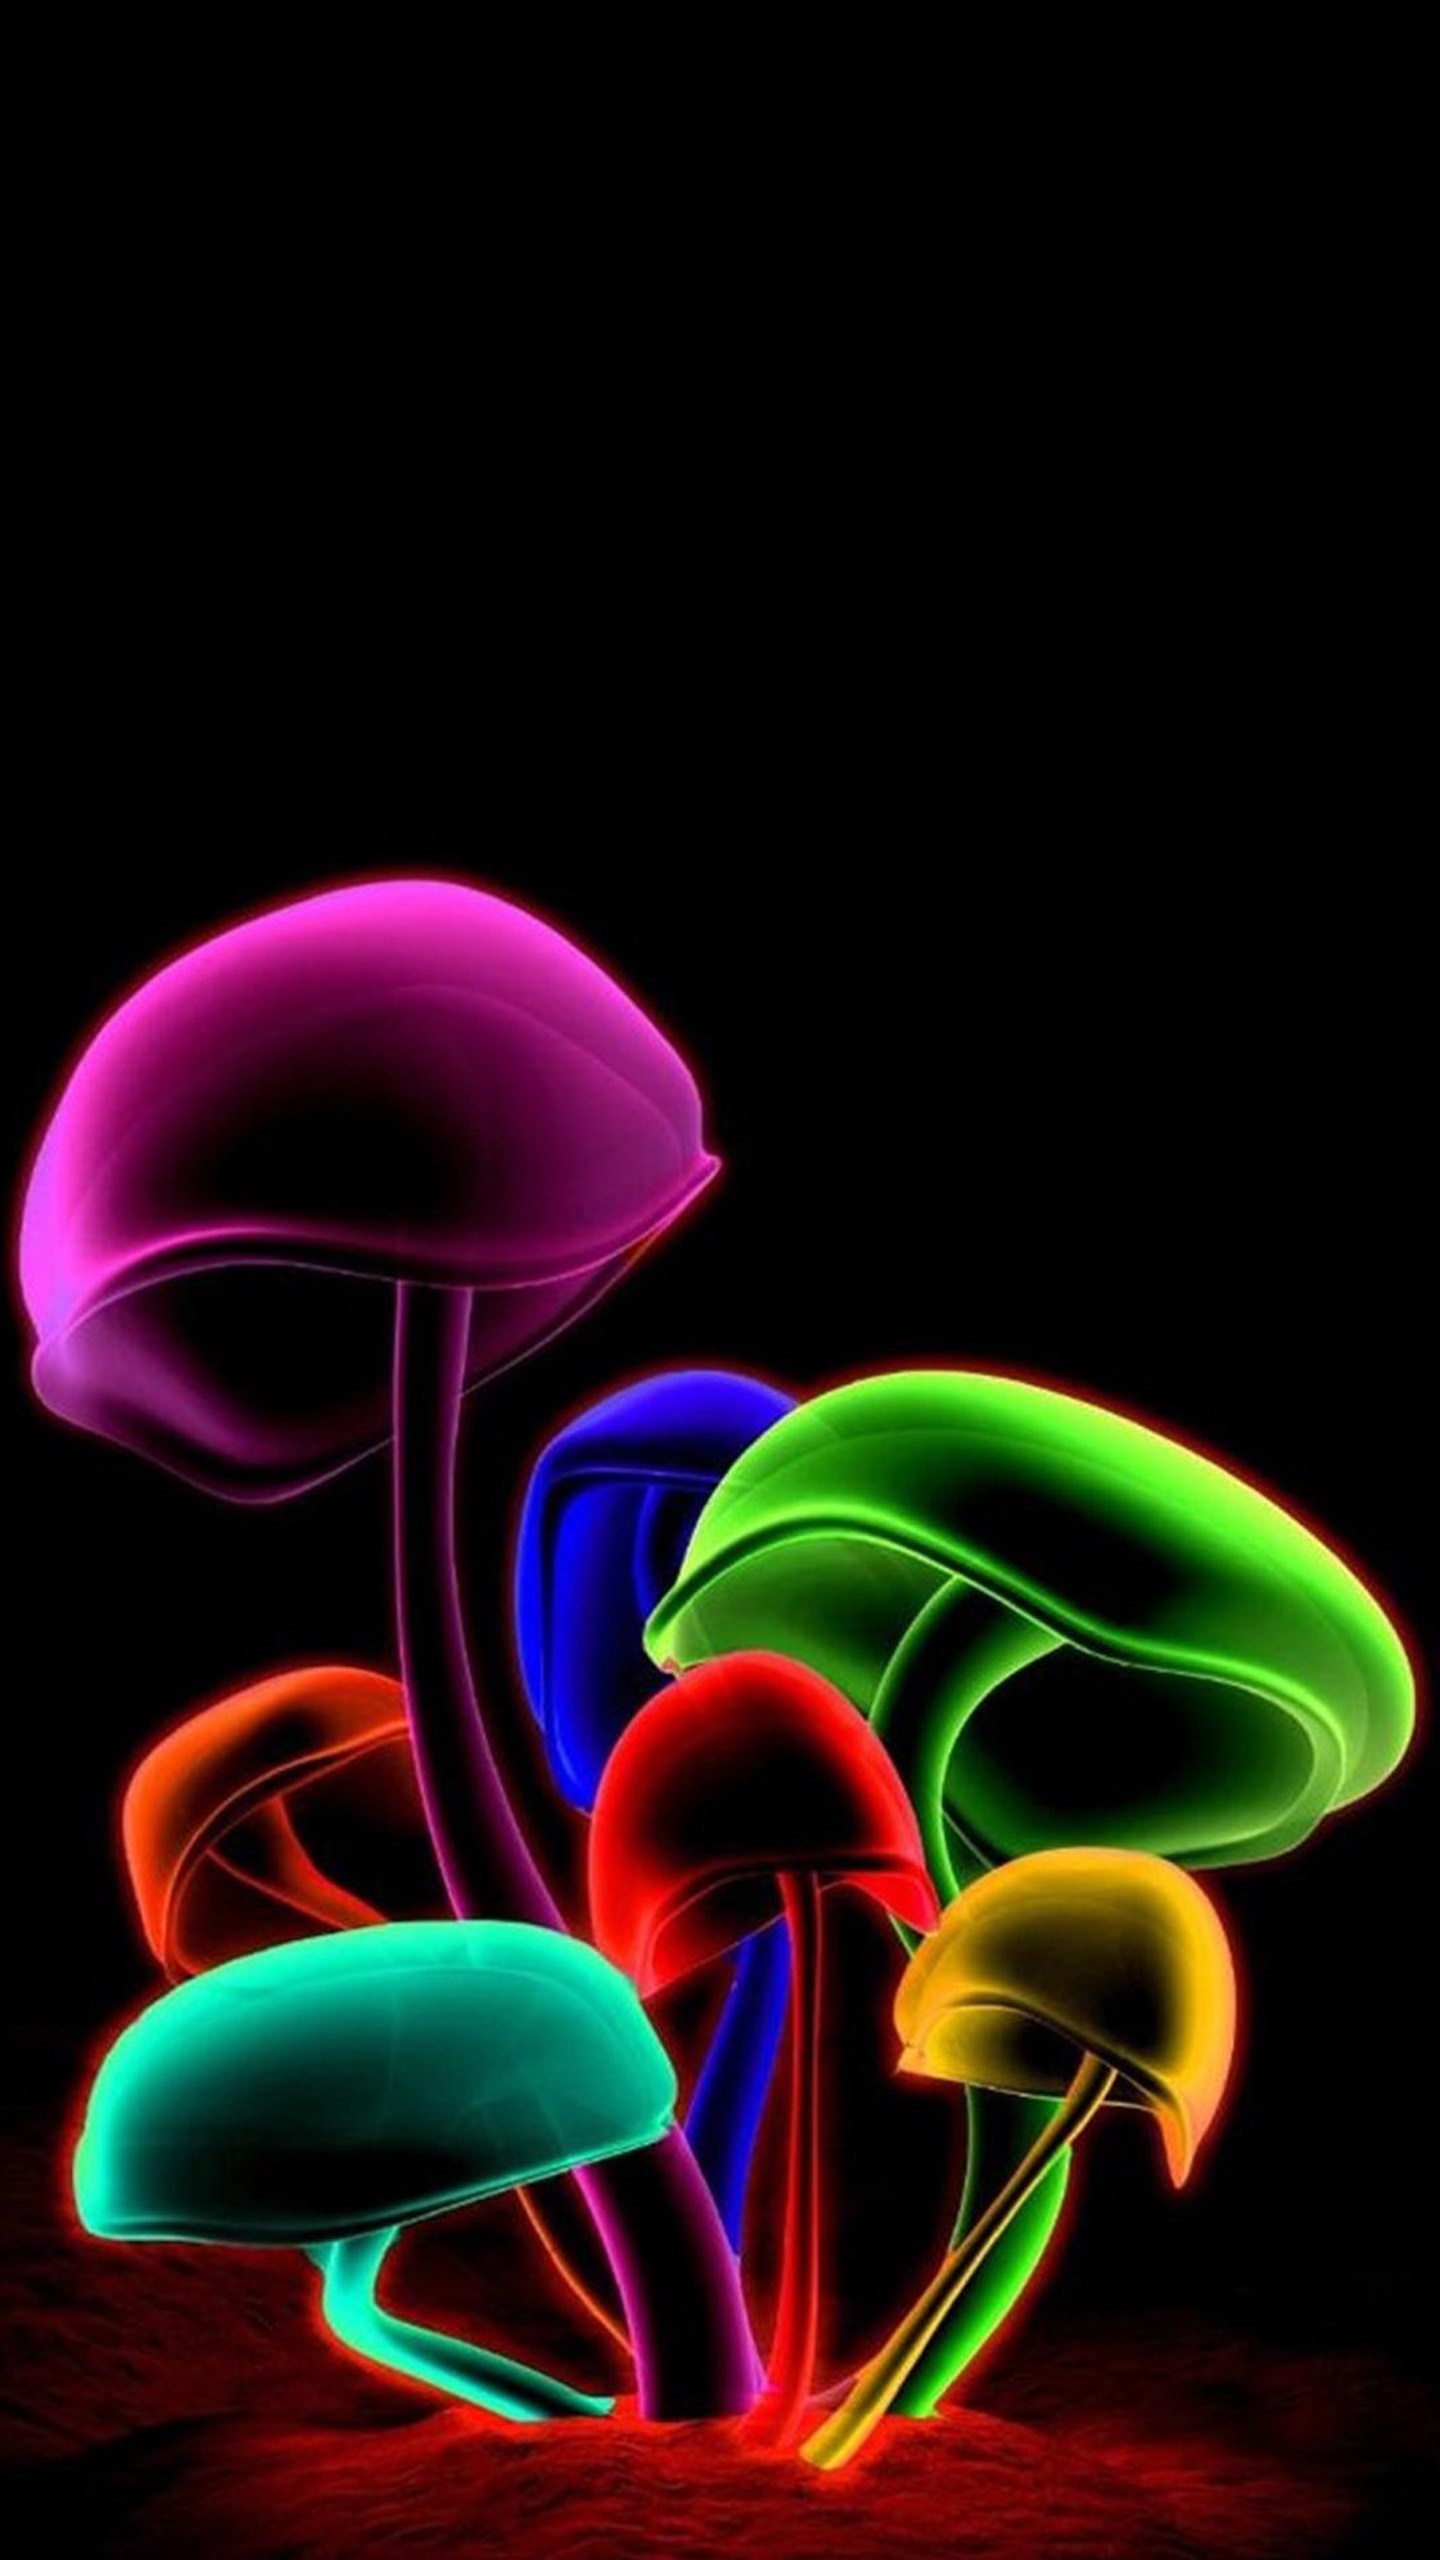 Samsung Galaxy Note Wallpaper Here Are Amazing